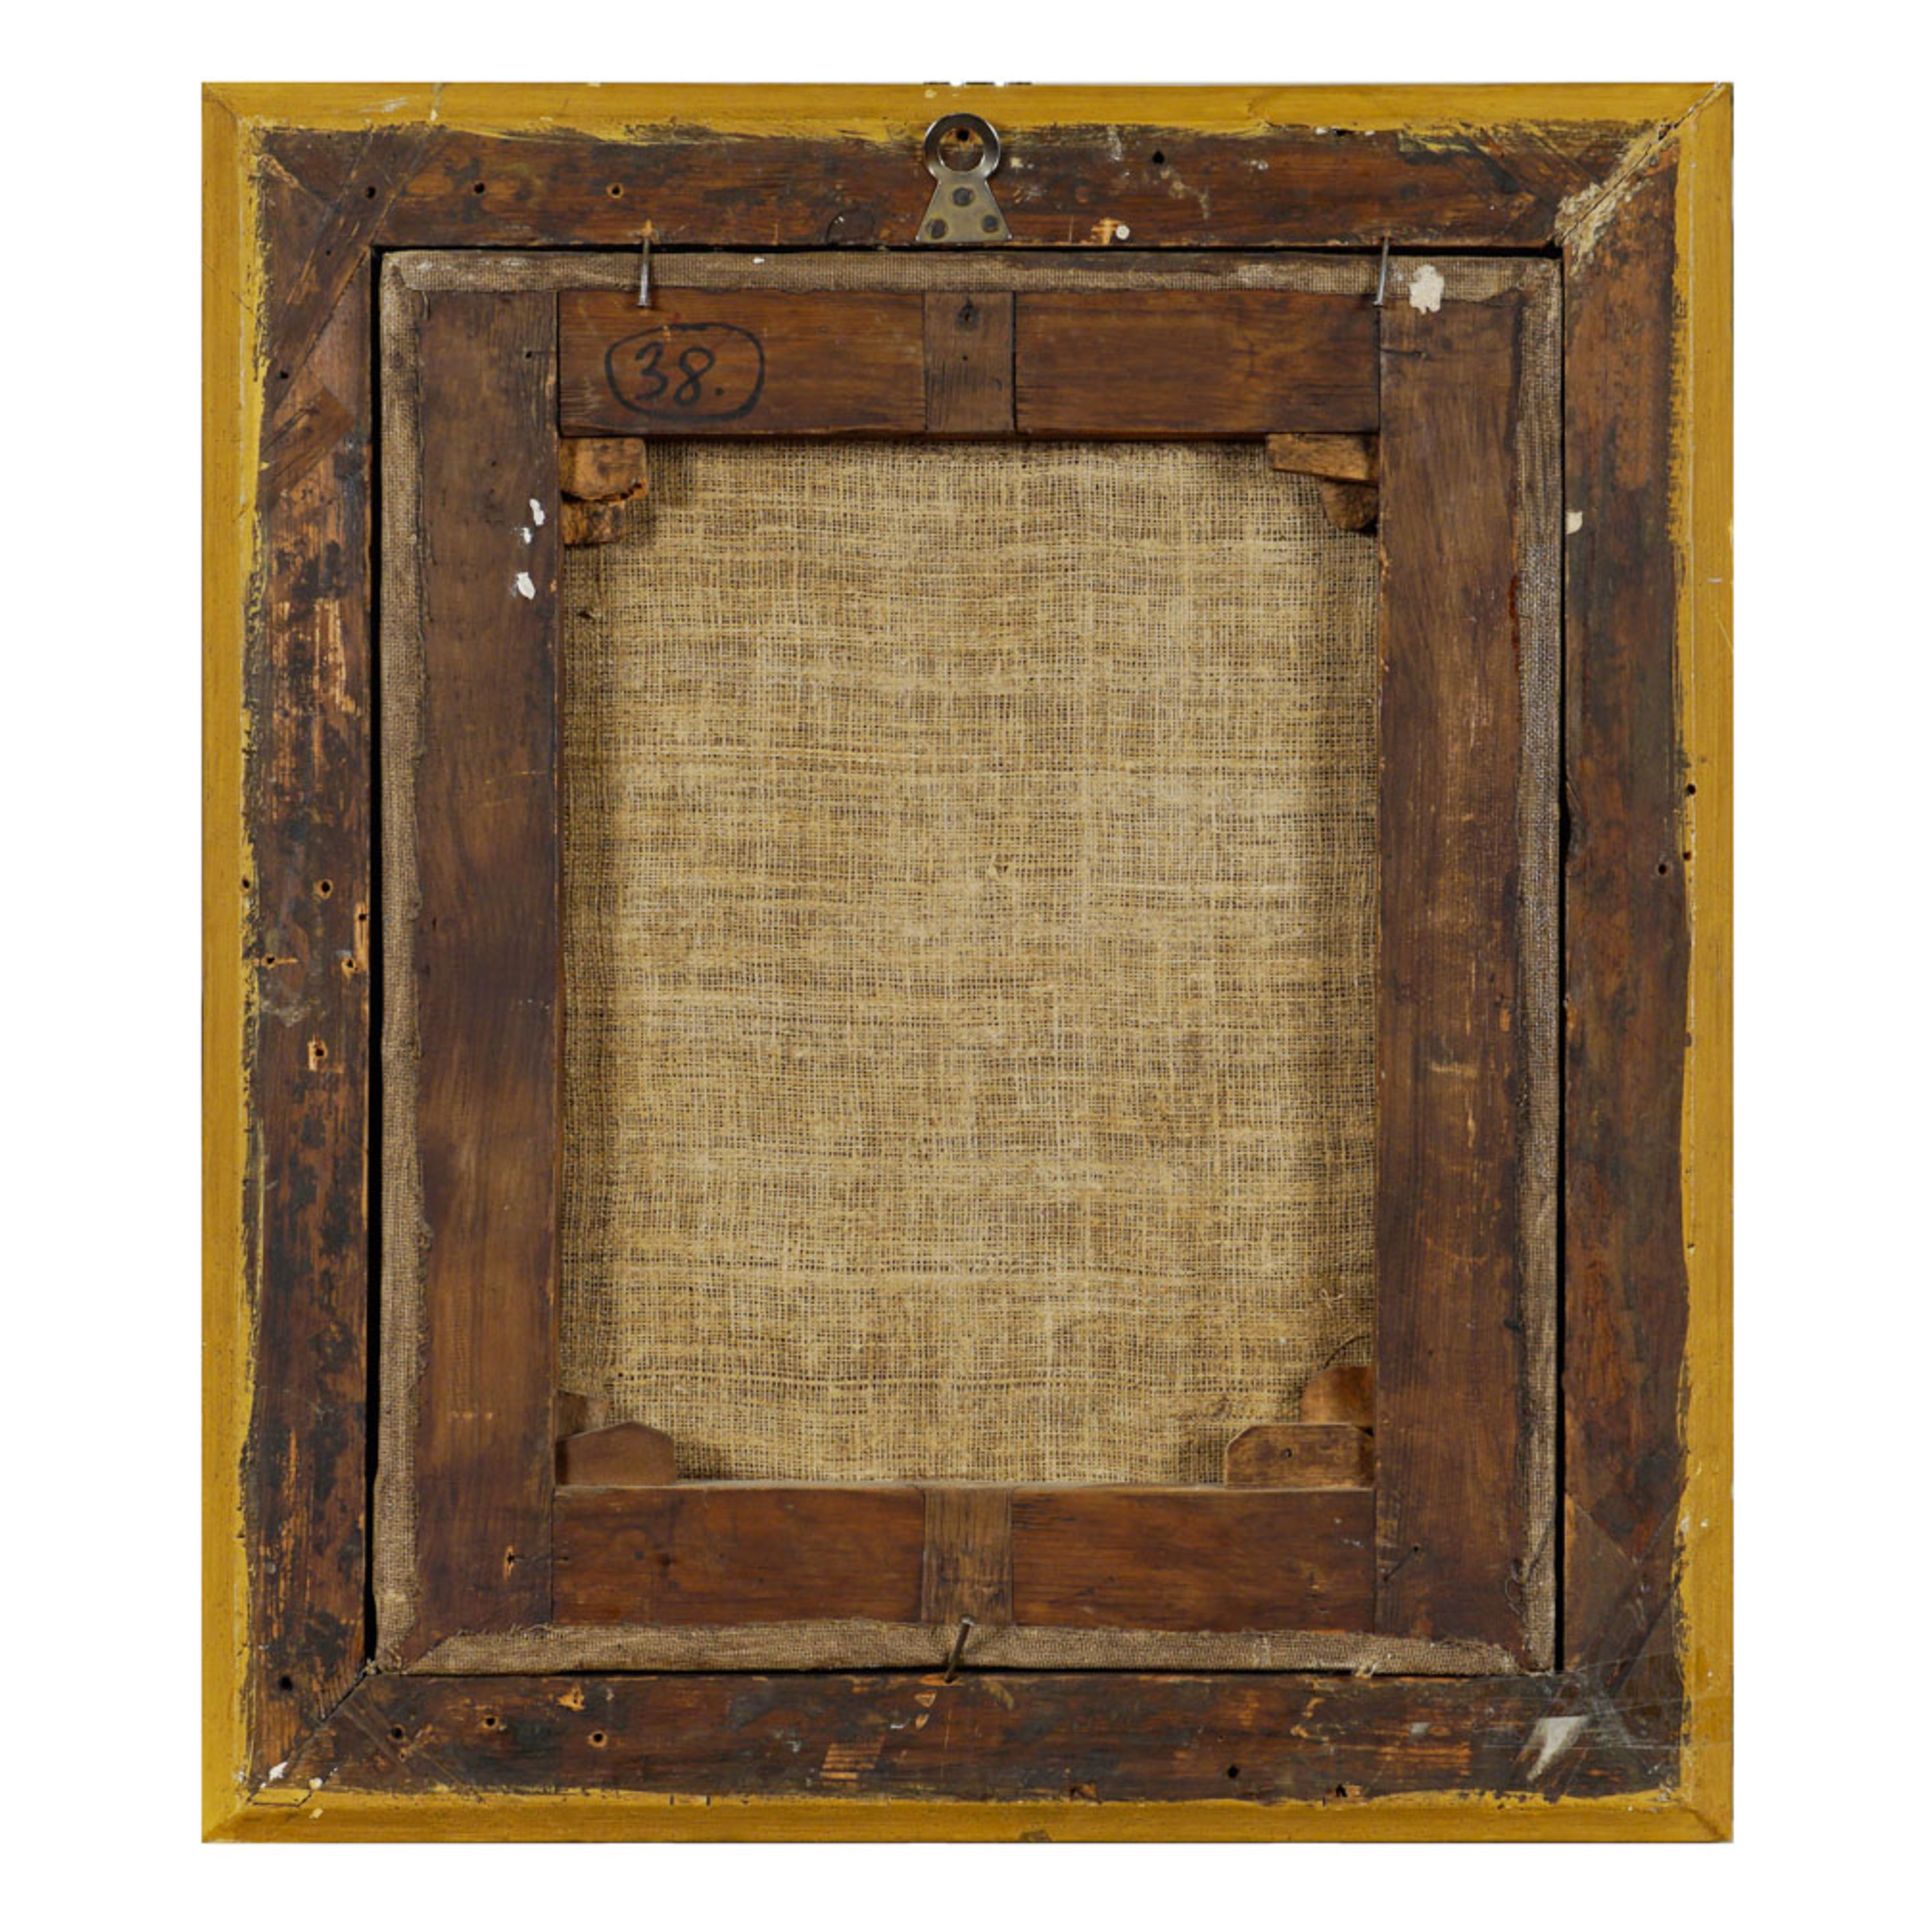 French school late 18th-19th century 44x36 cm. - Image 2 of 2